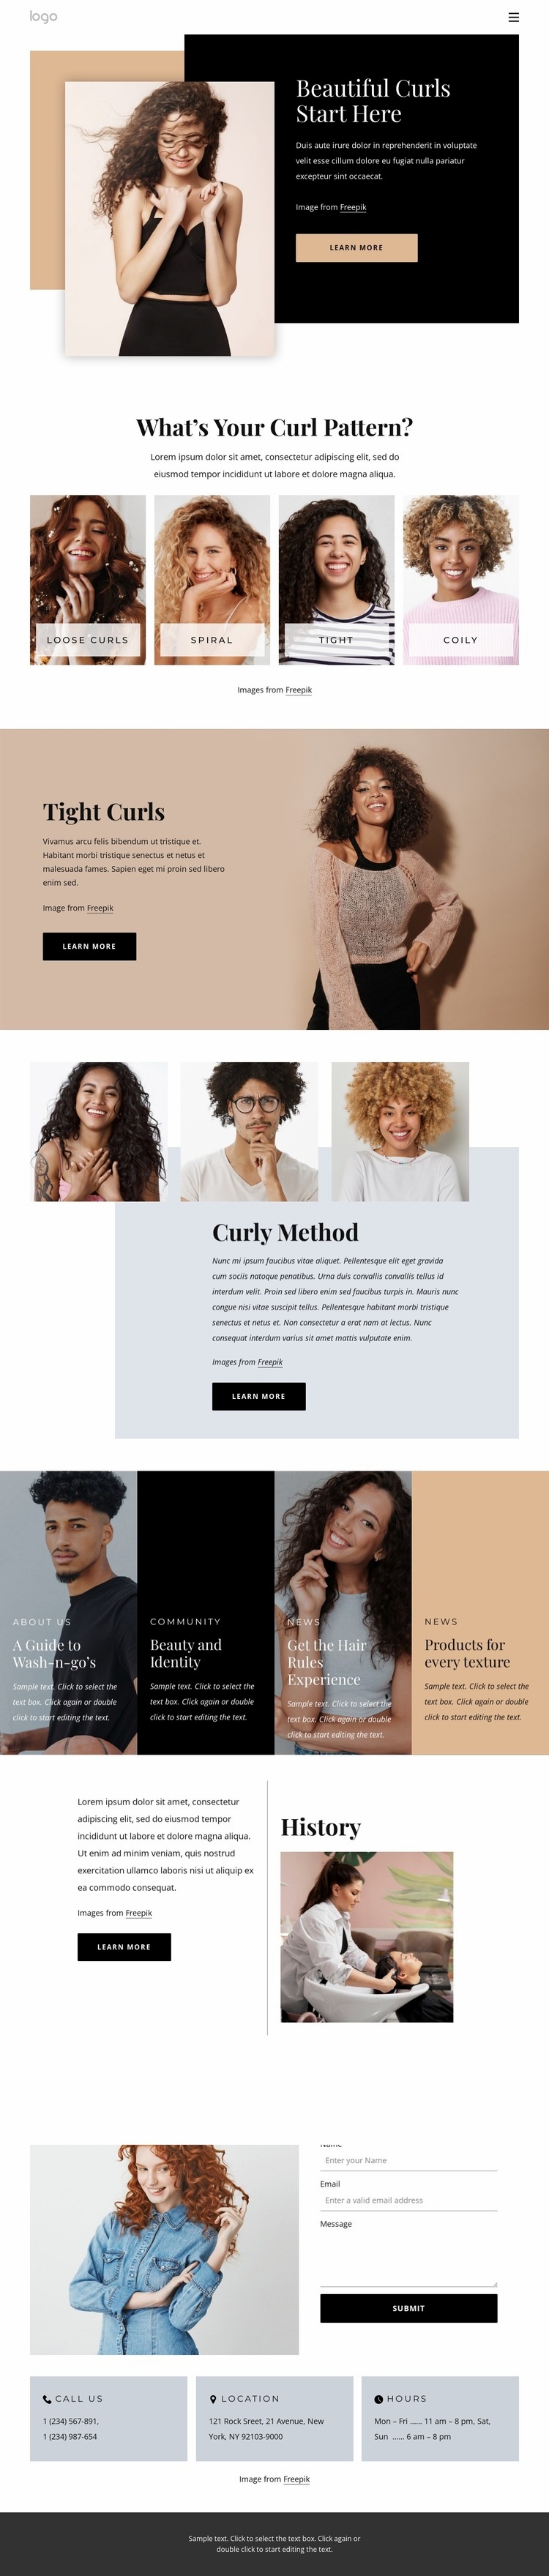 Bring out the best in your curls Wix Template Alternative